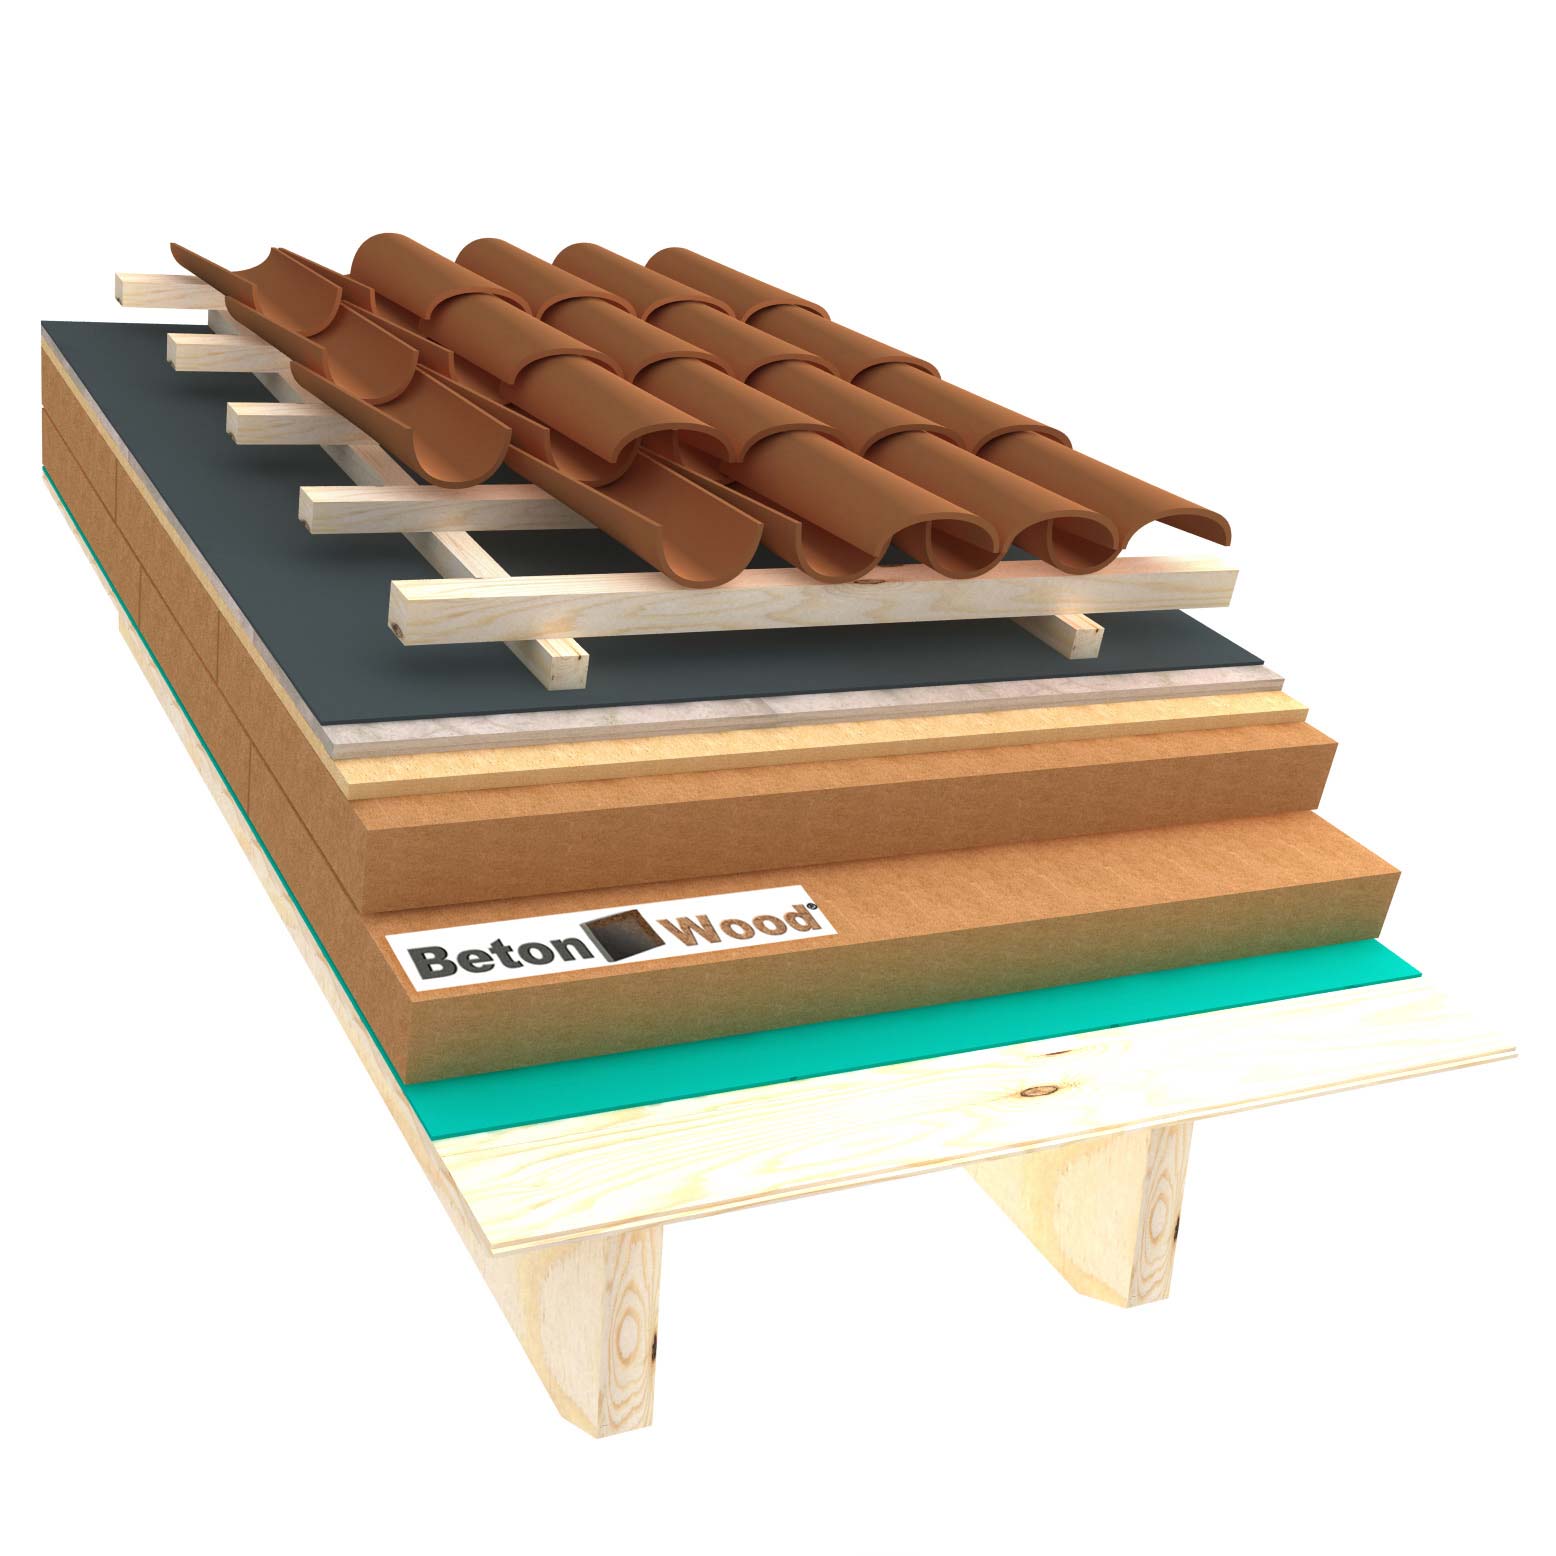 Ventilated roof with wood fiber Isorel, Special dry and cement bonded particle boards on matchboarding